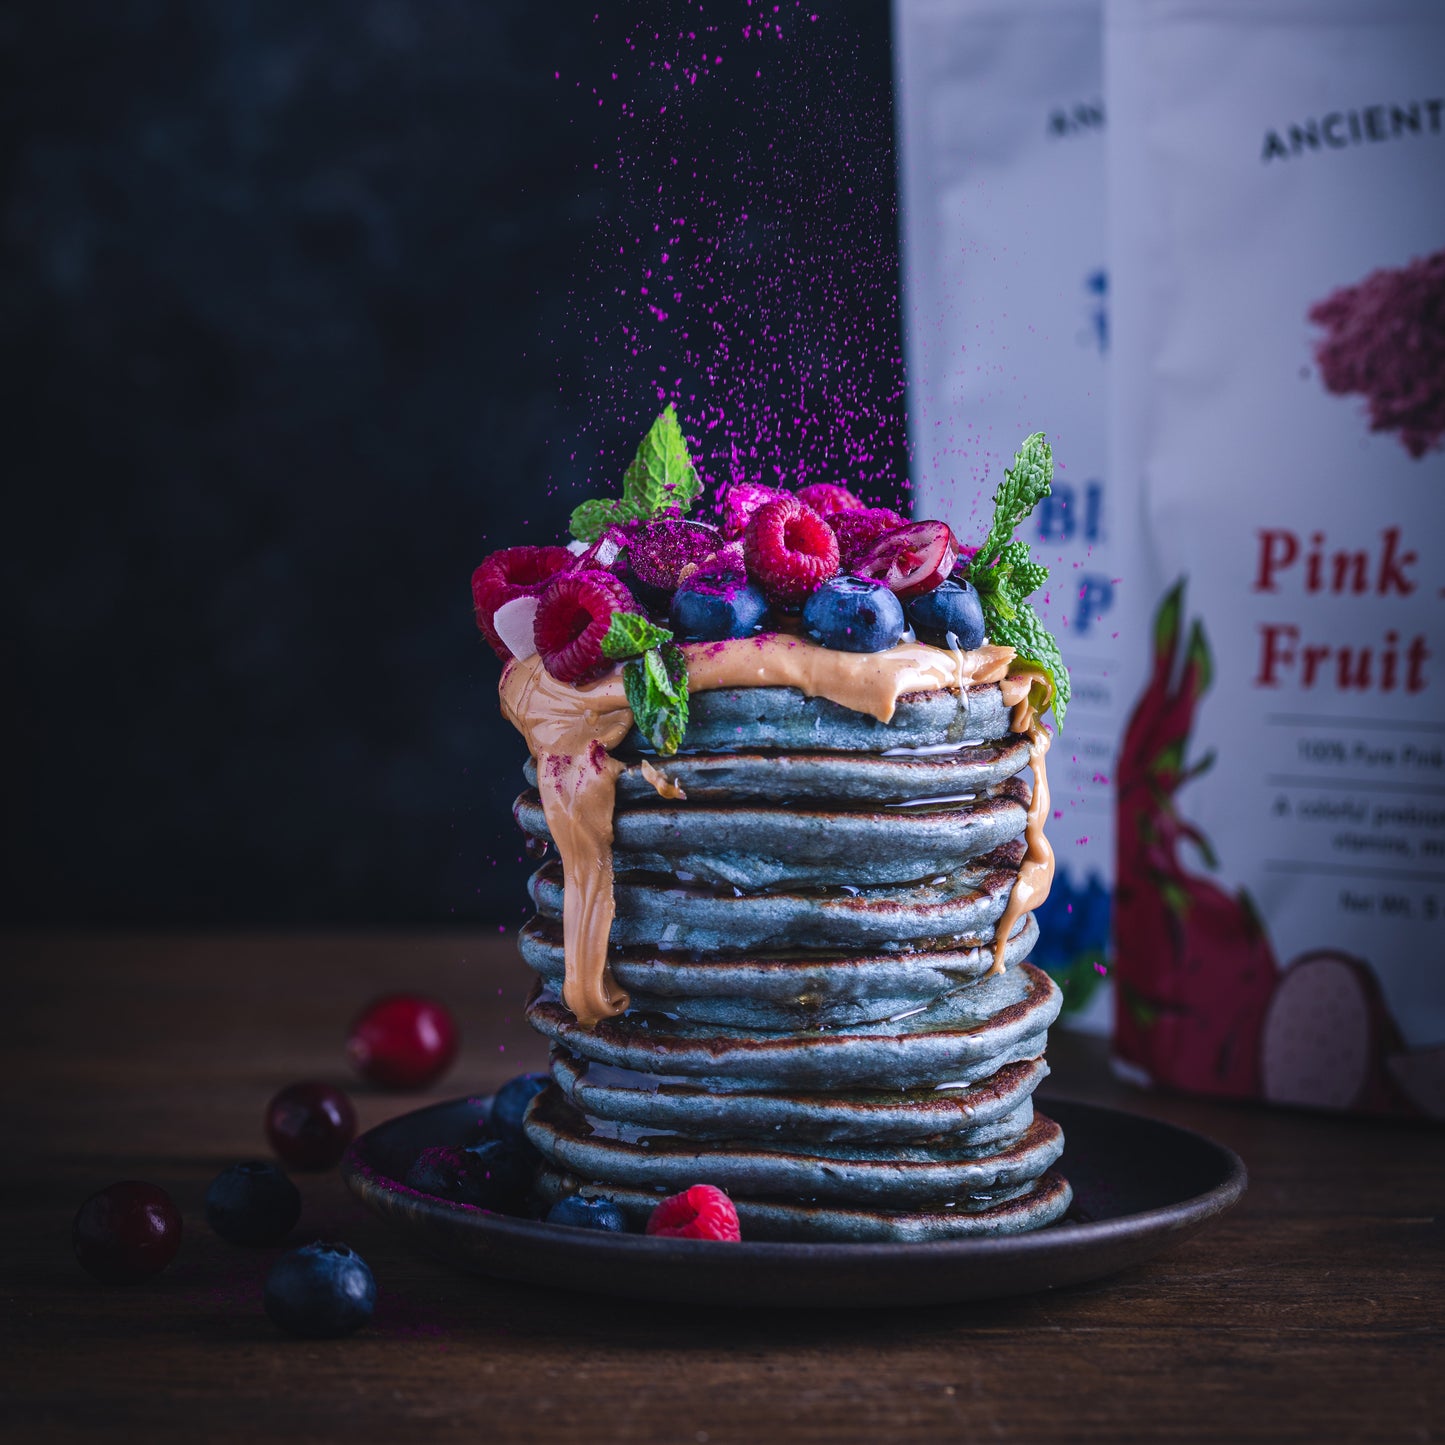 Butterfly Pea Flower pancakes dusted with red dragon fruit powder